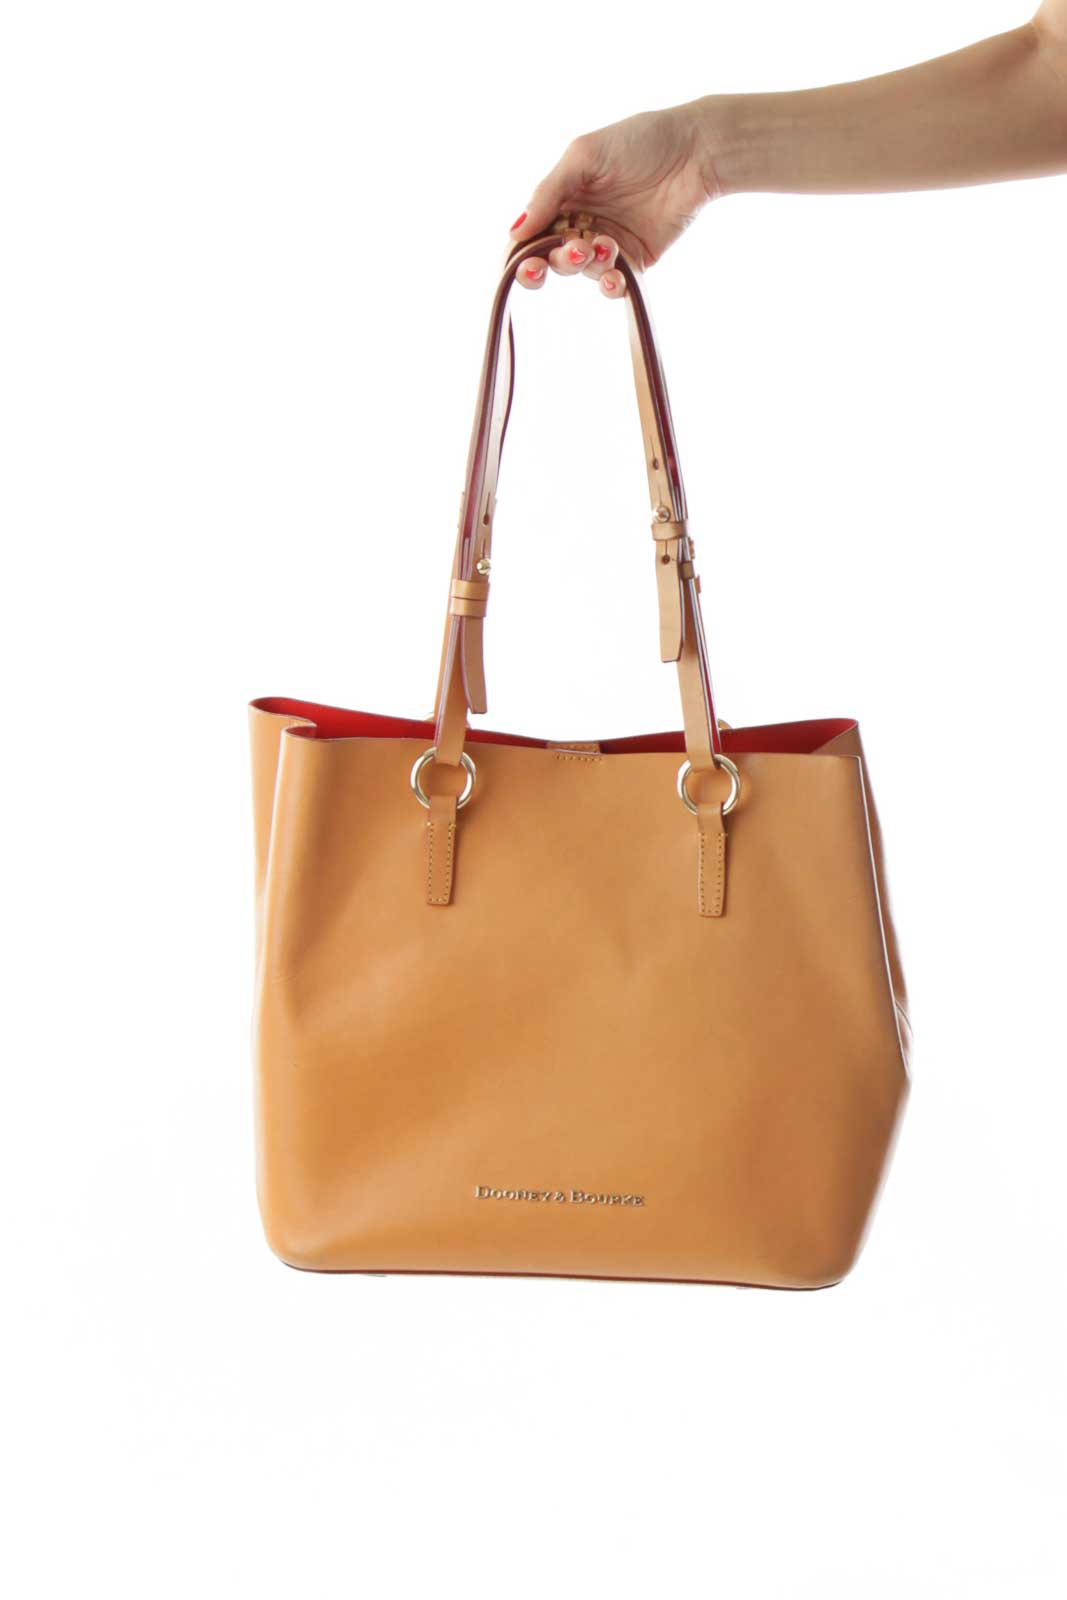 Brown Gold-Detailed Tote Bag Front